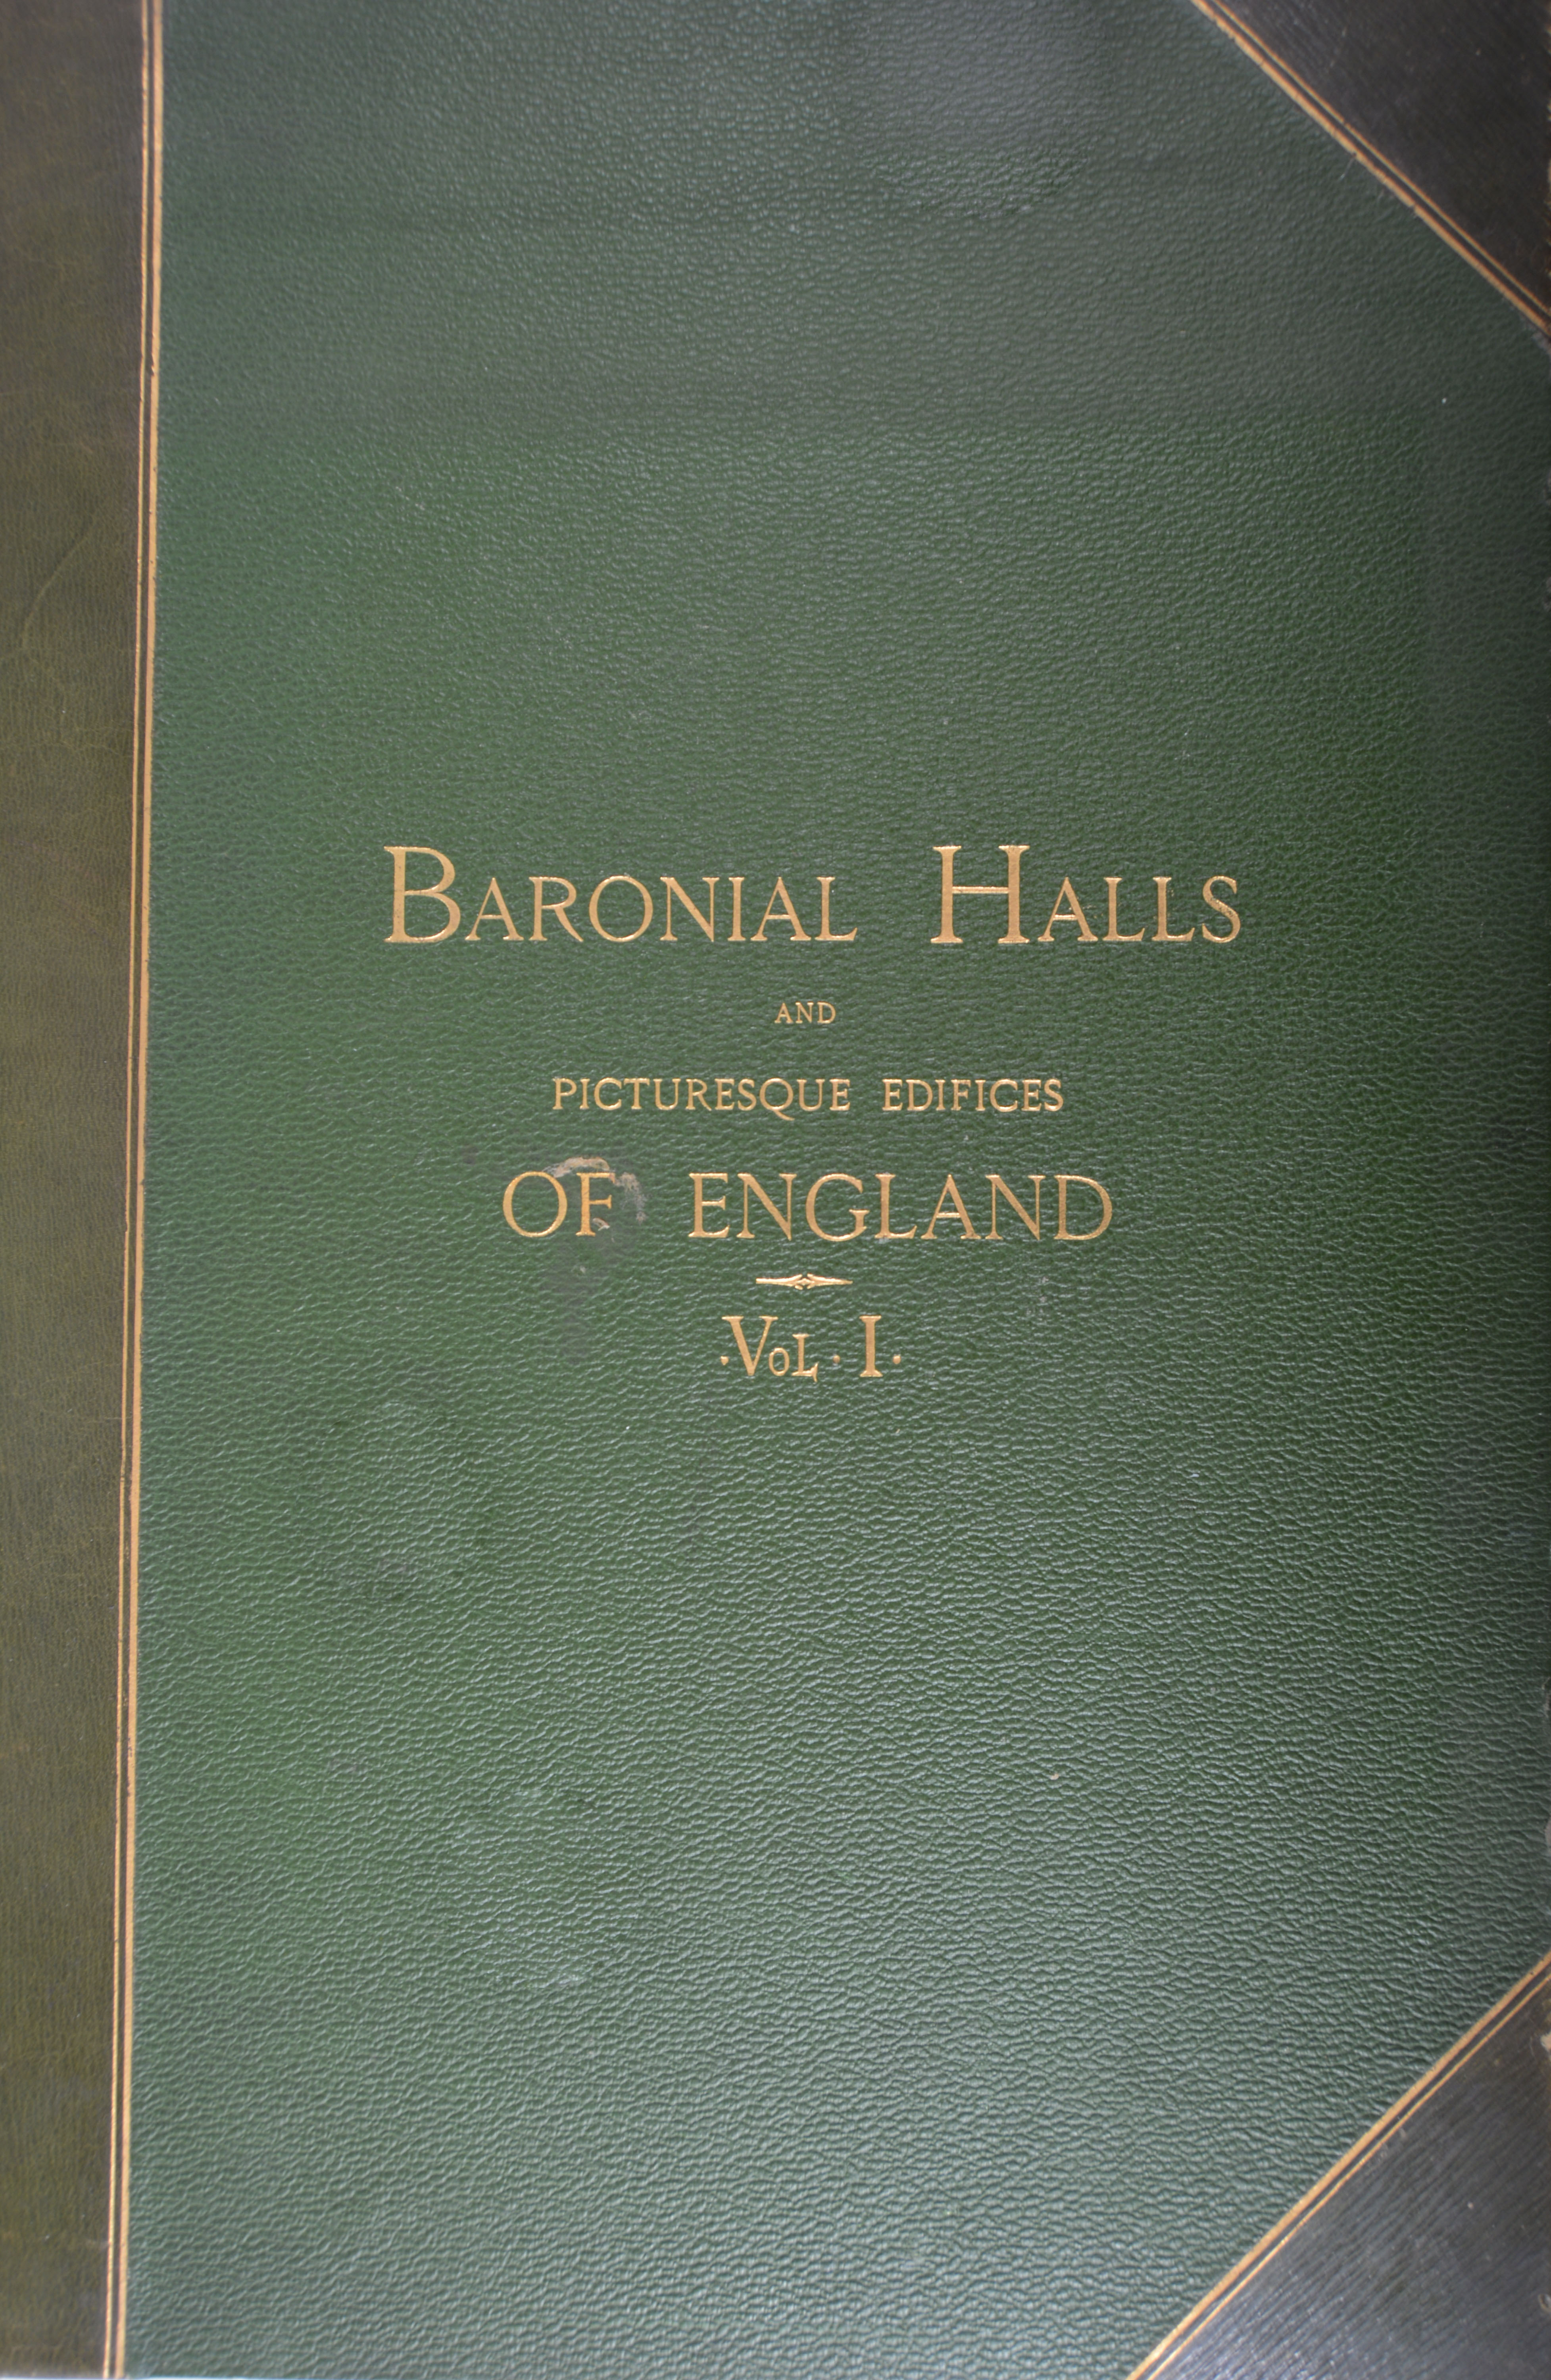 Baronial Halls and Ancient Picturesque Edifices of England, Henry Sotheran & Co.